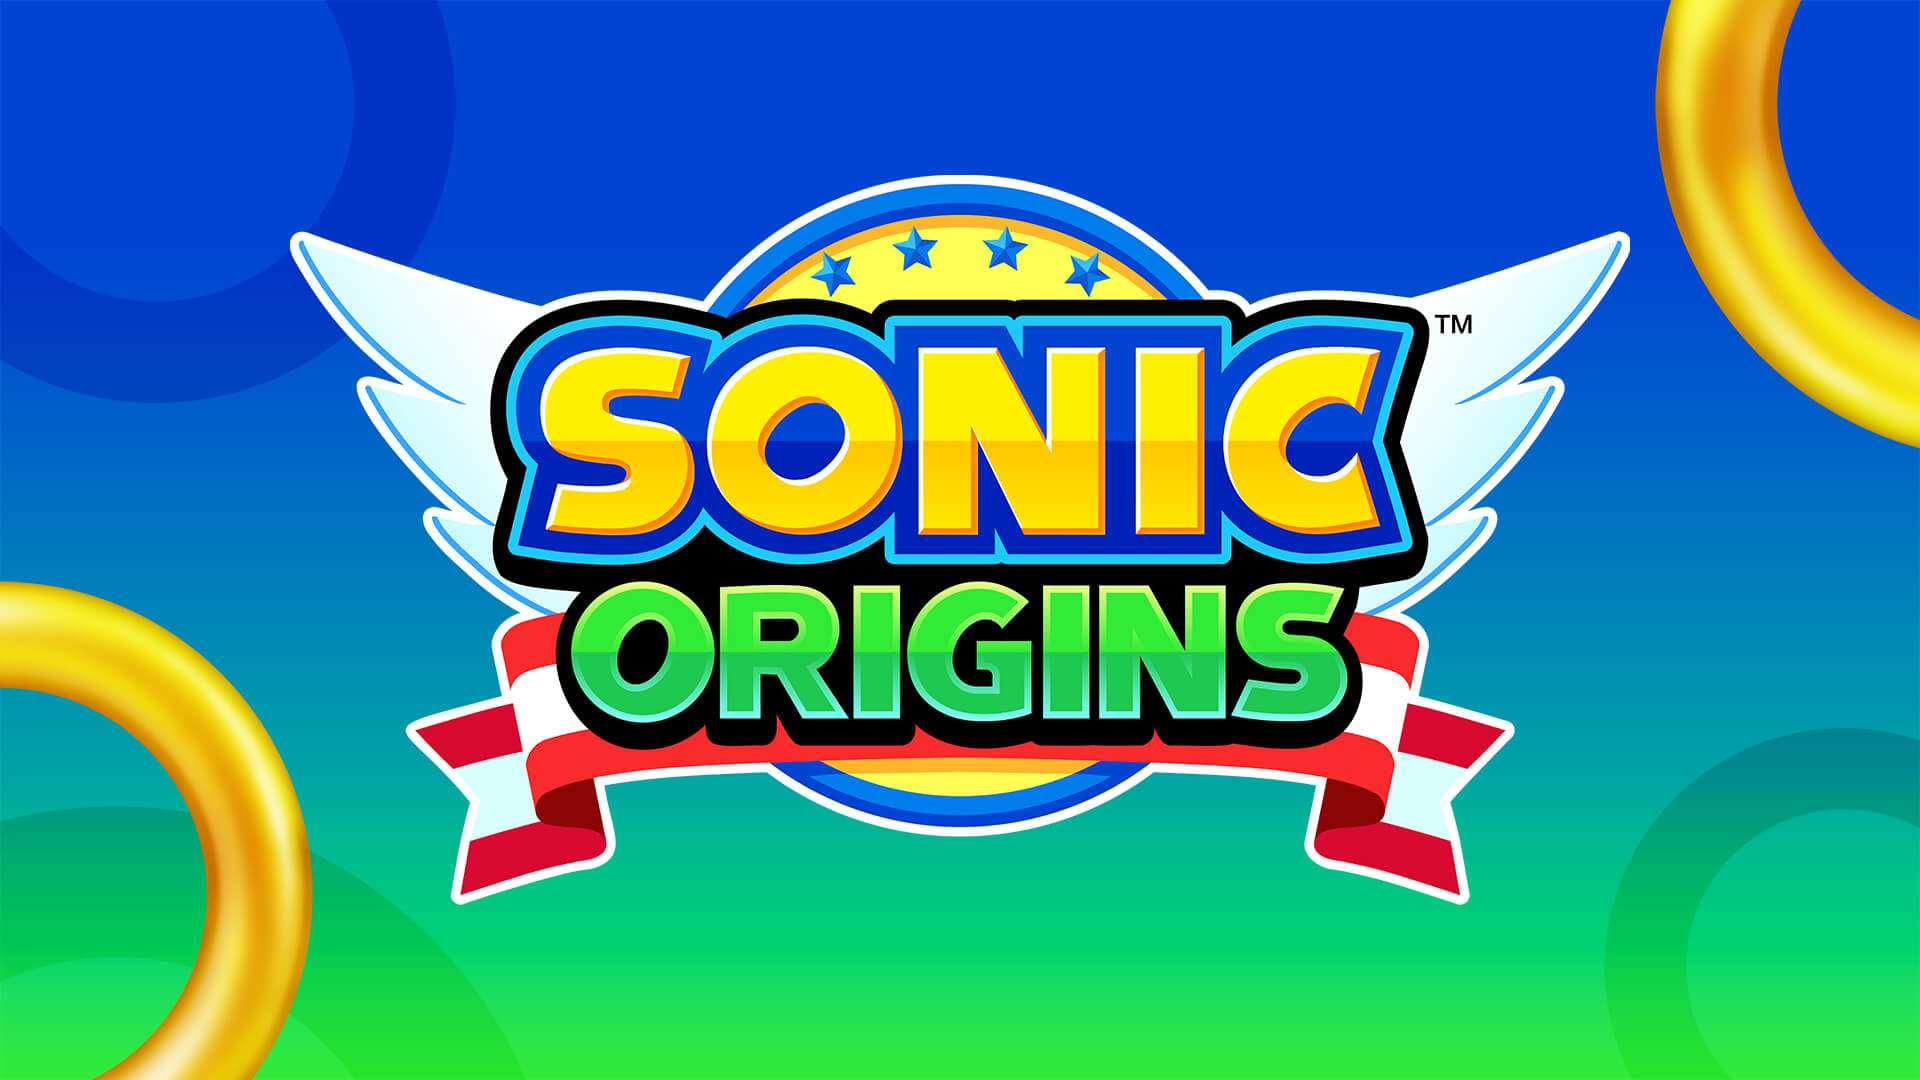 Sonic Origins Spin Dashes To The Latest Platforms Next Year